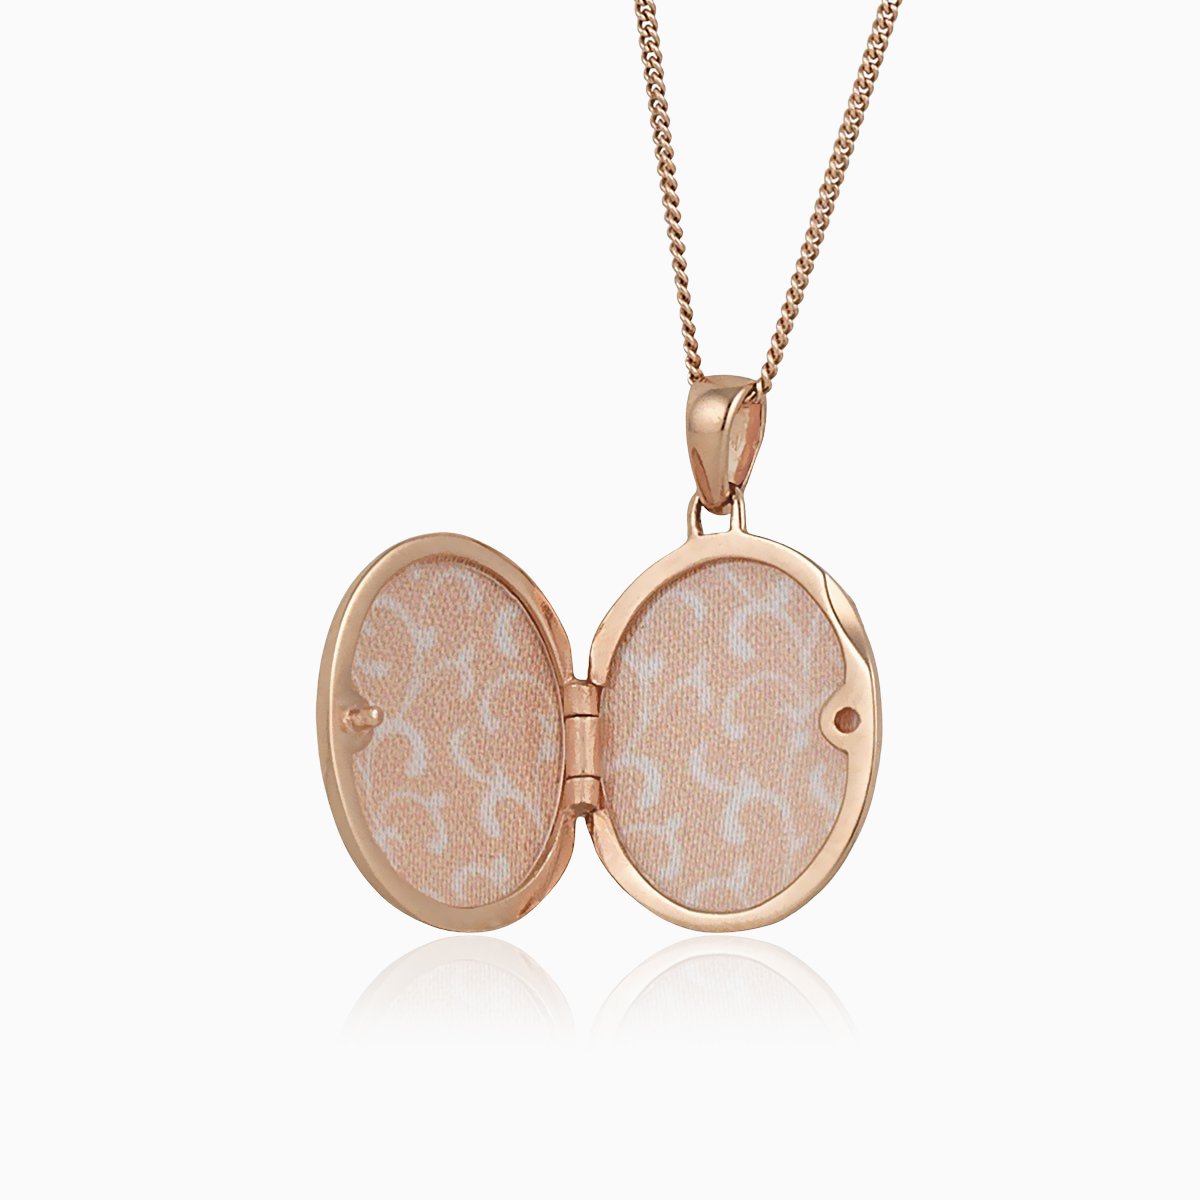 Open view of a 9 ct rose gold oval locket with a 9 ct rose gold rope chain.